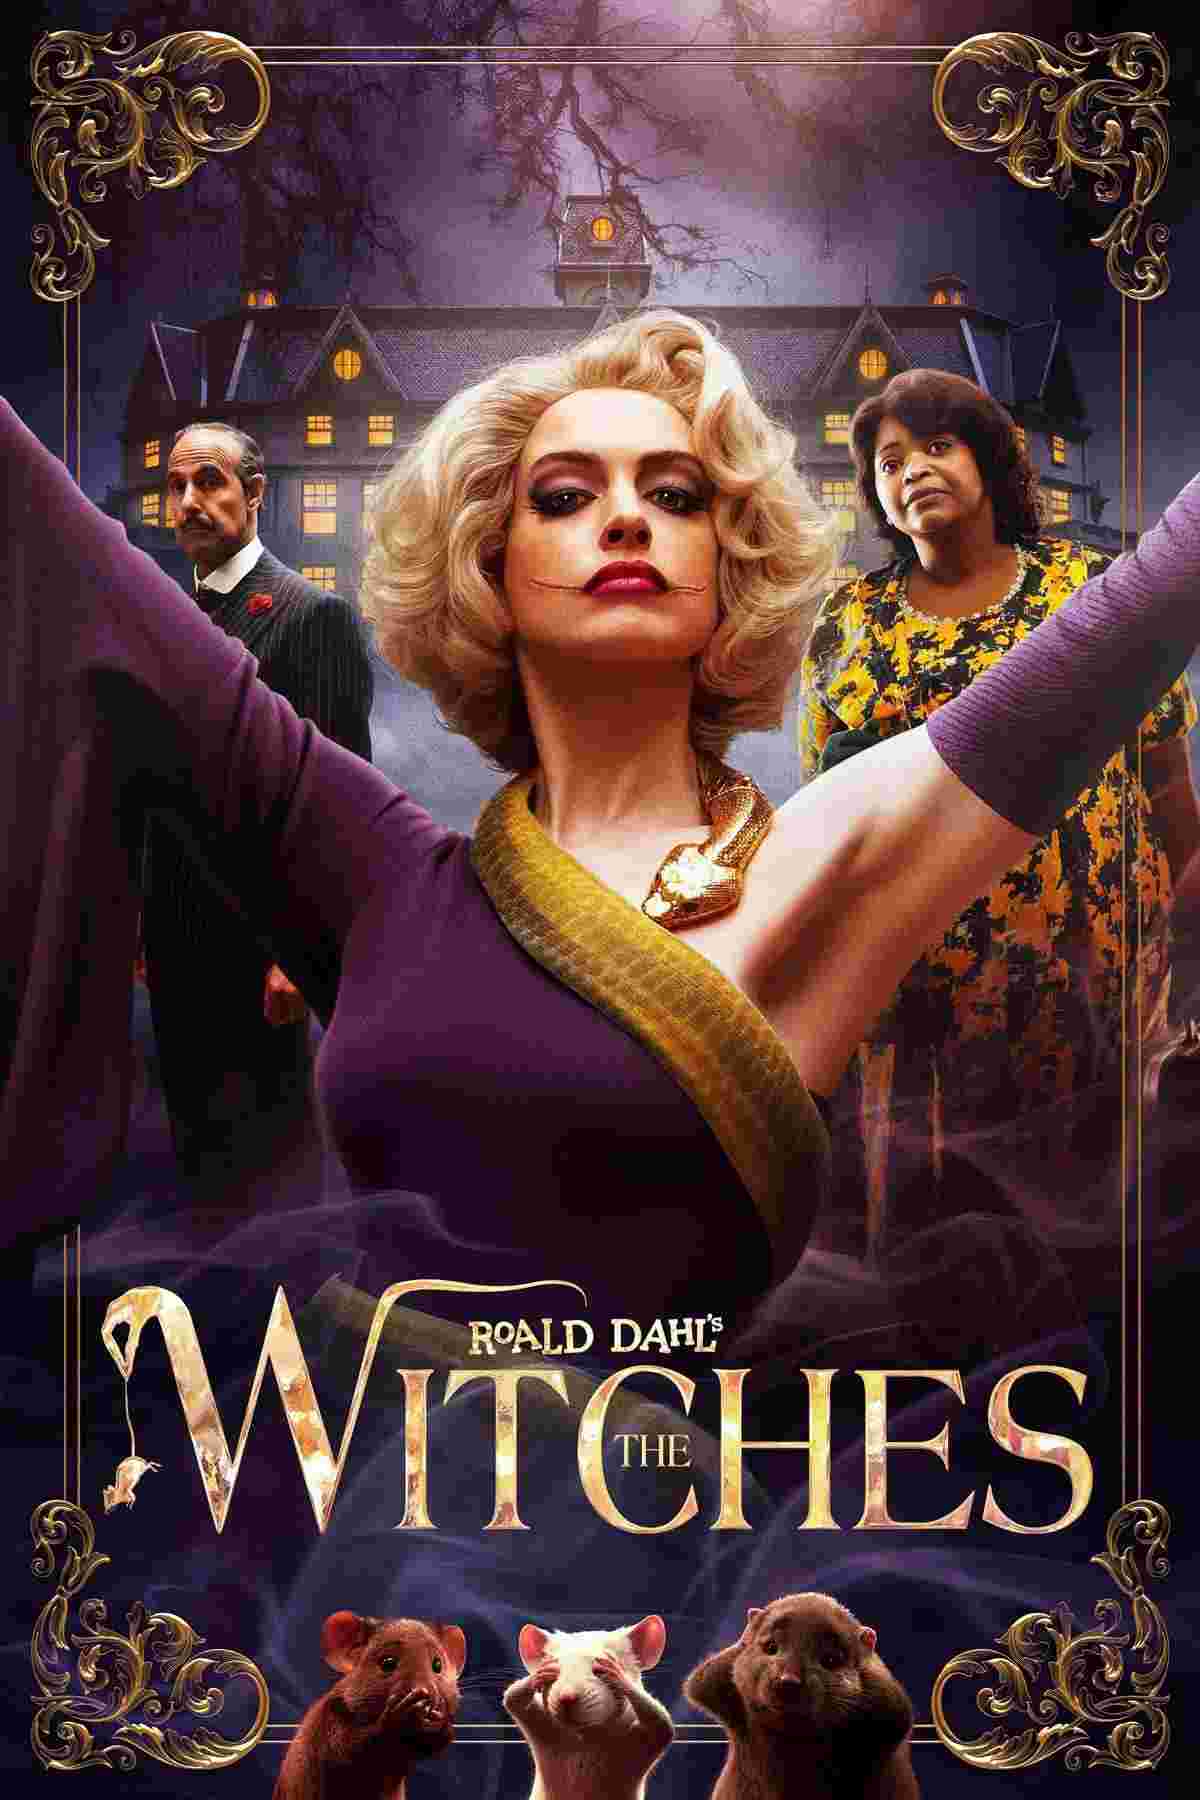 The Witches (2020) Anne Hathaway